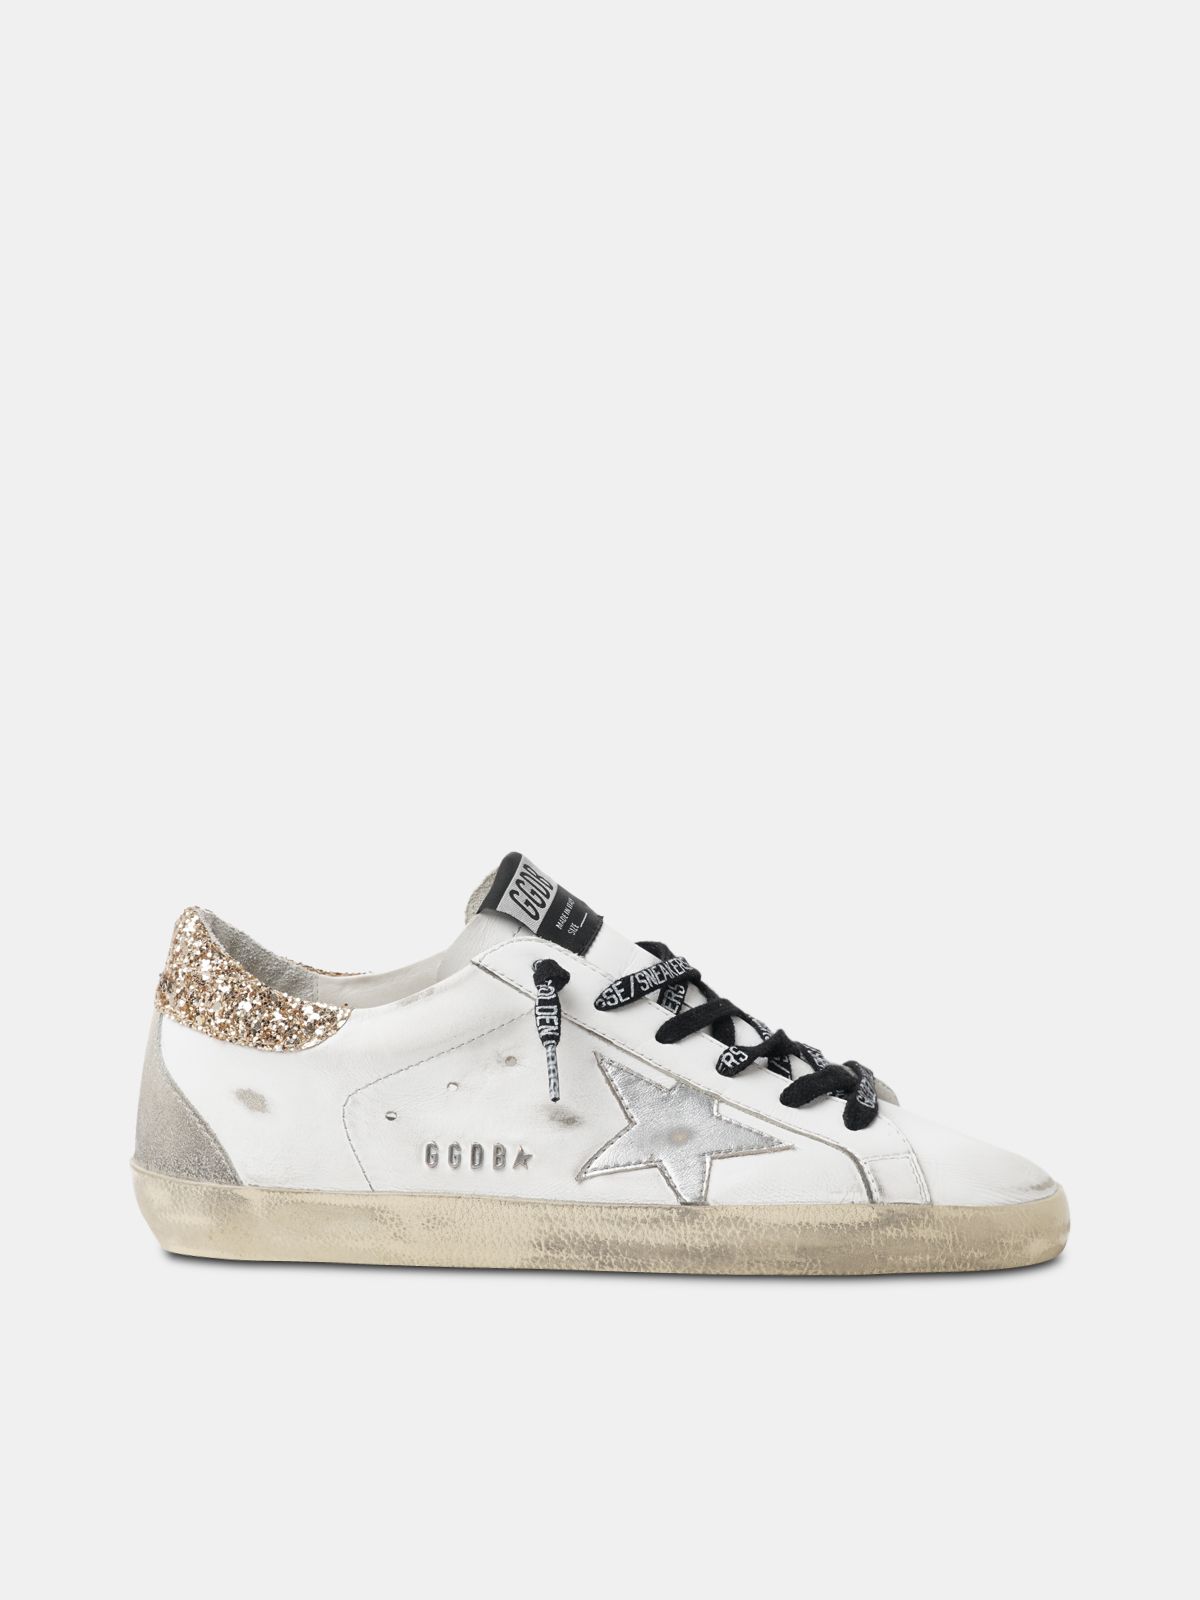 golden goose White Super-Star with leather glittery sneakers tab heel